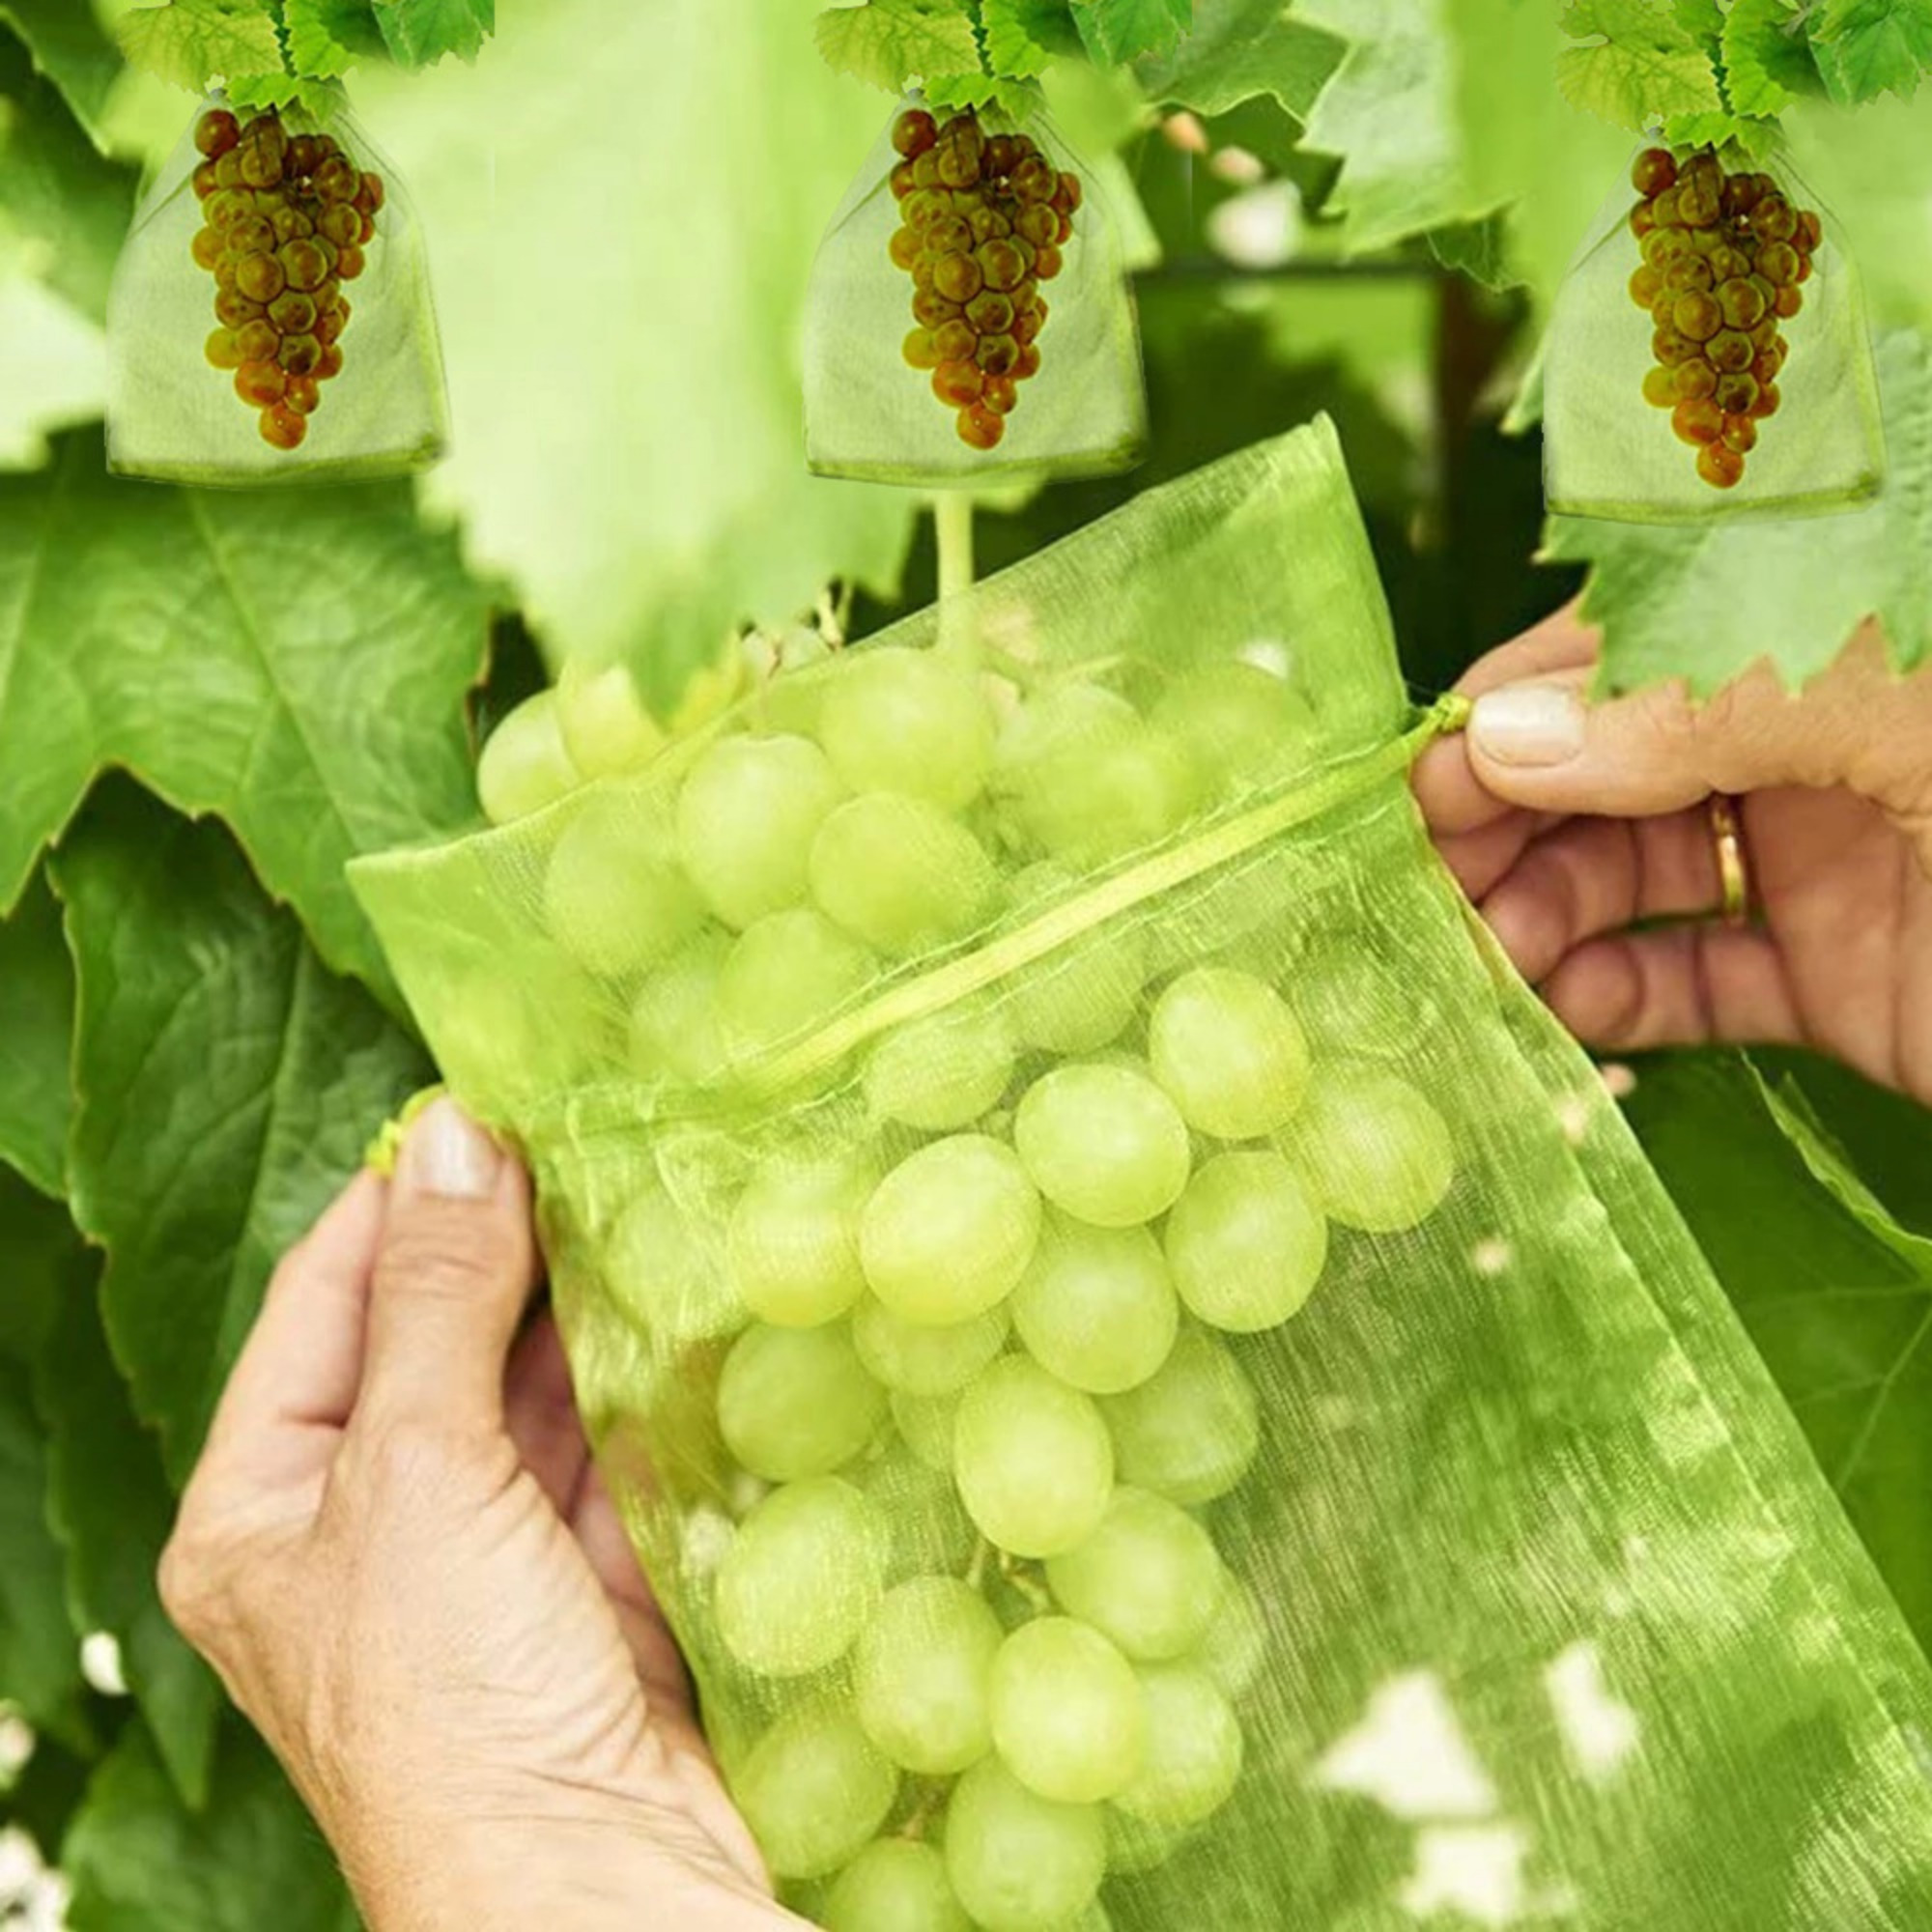 

50/100pcs Garden Fruit Protection Bags, Organza Mesh Netting Covers For Grapes Fruits Vegetables, Anti-bug Drawstring Pouches, Candy Gift Bags, Reusable Supplies